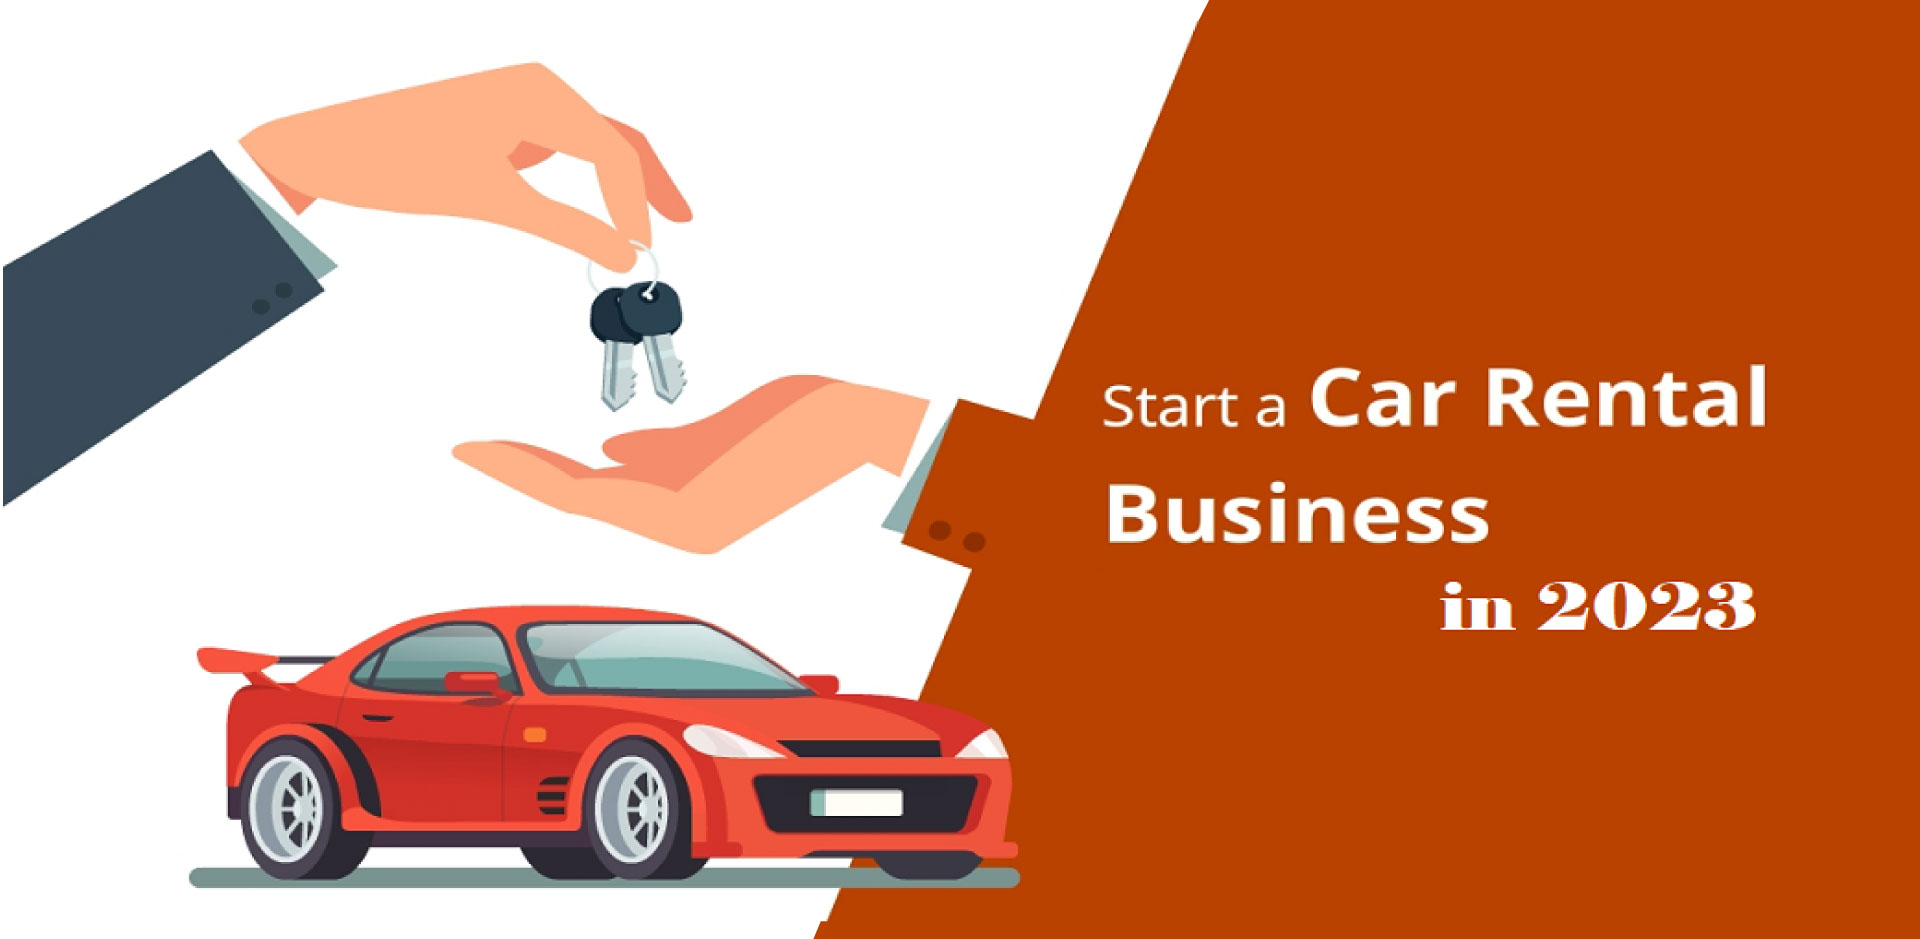 How to Start a Car Rental Business for 2023?